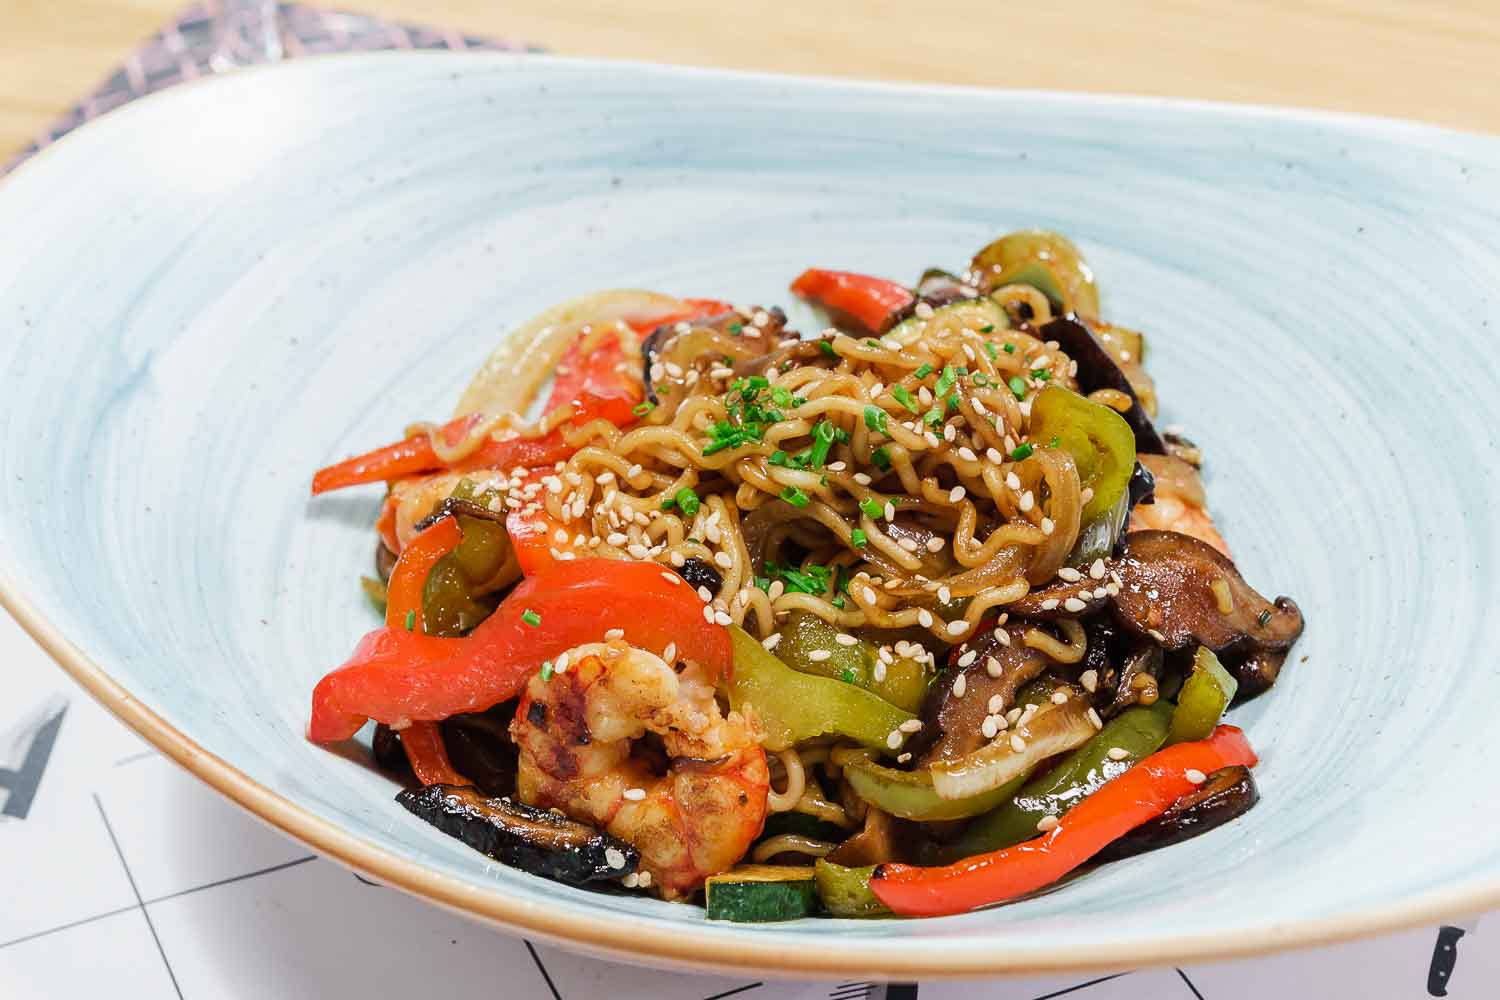 Noodles with vegetables and oyster sauce